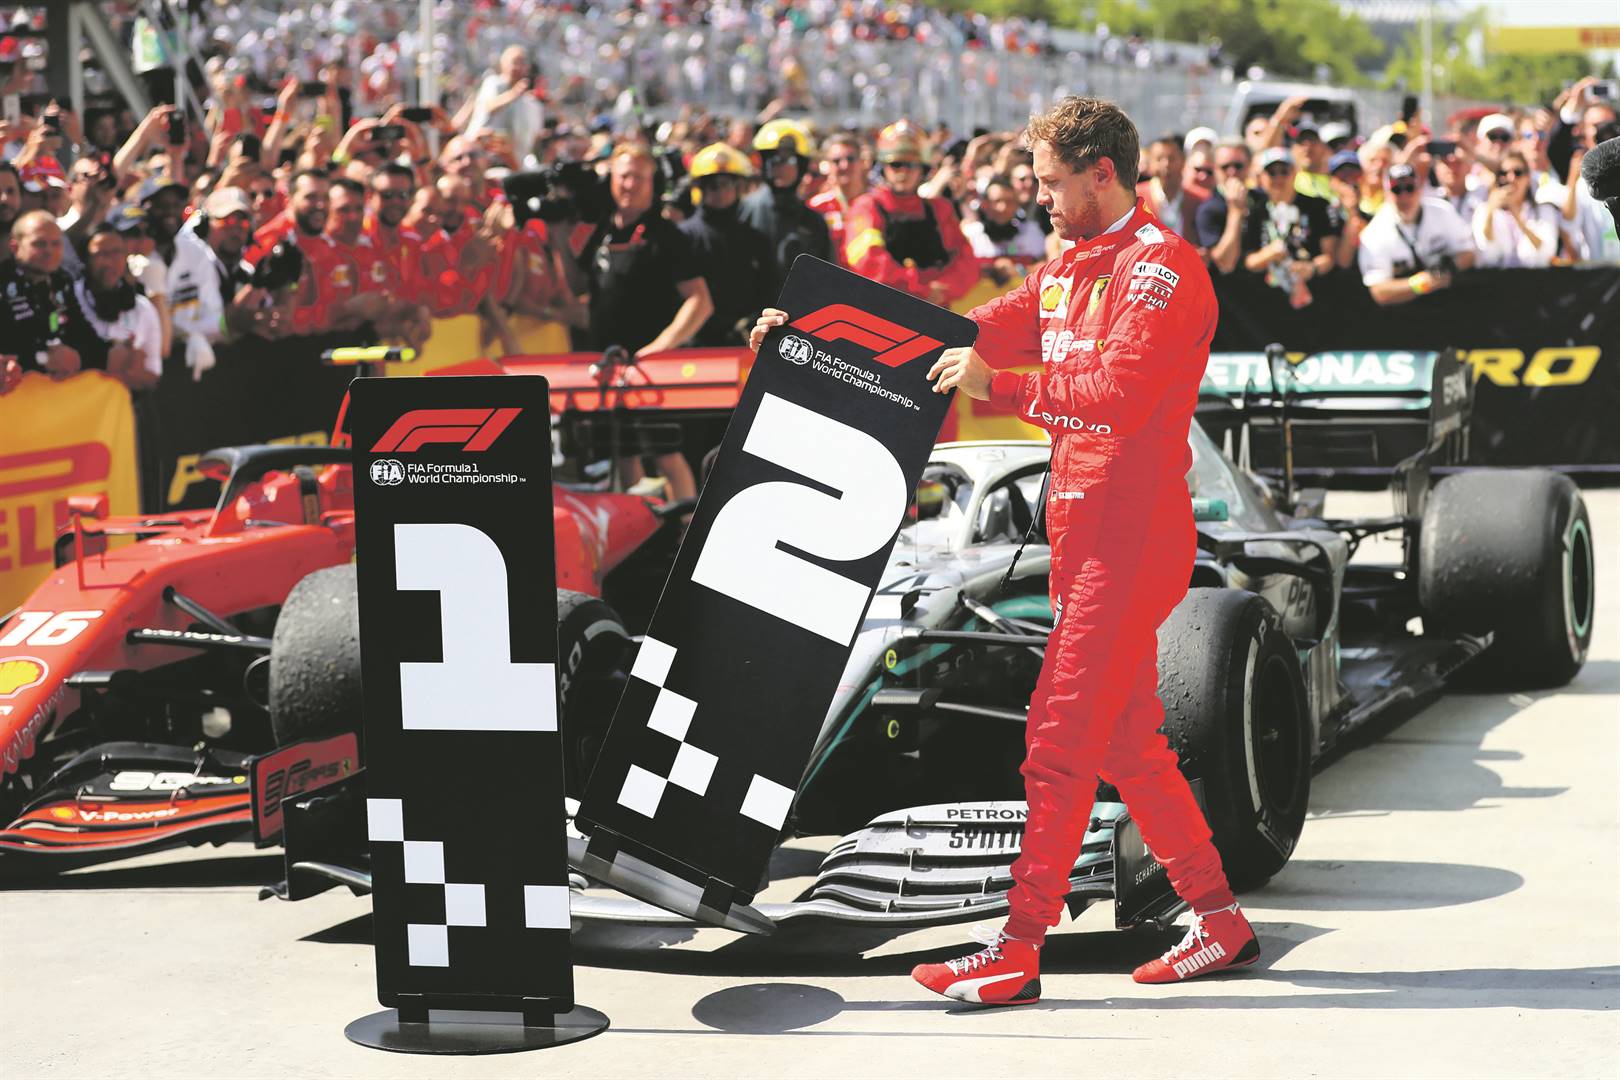 Second-placed Sebastian Vettel of Germany and Ferrari swaps the number boards at parc ferme during the F1 Grand Prix of Canada at Circuit Gilles Villeneuve last Sunday.Picture: Dan Istitene / Getty Images